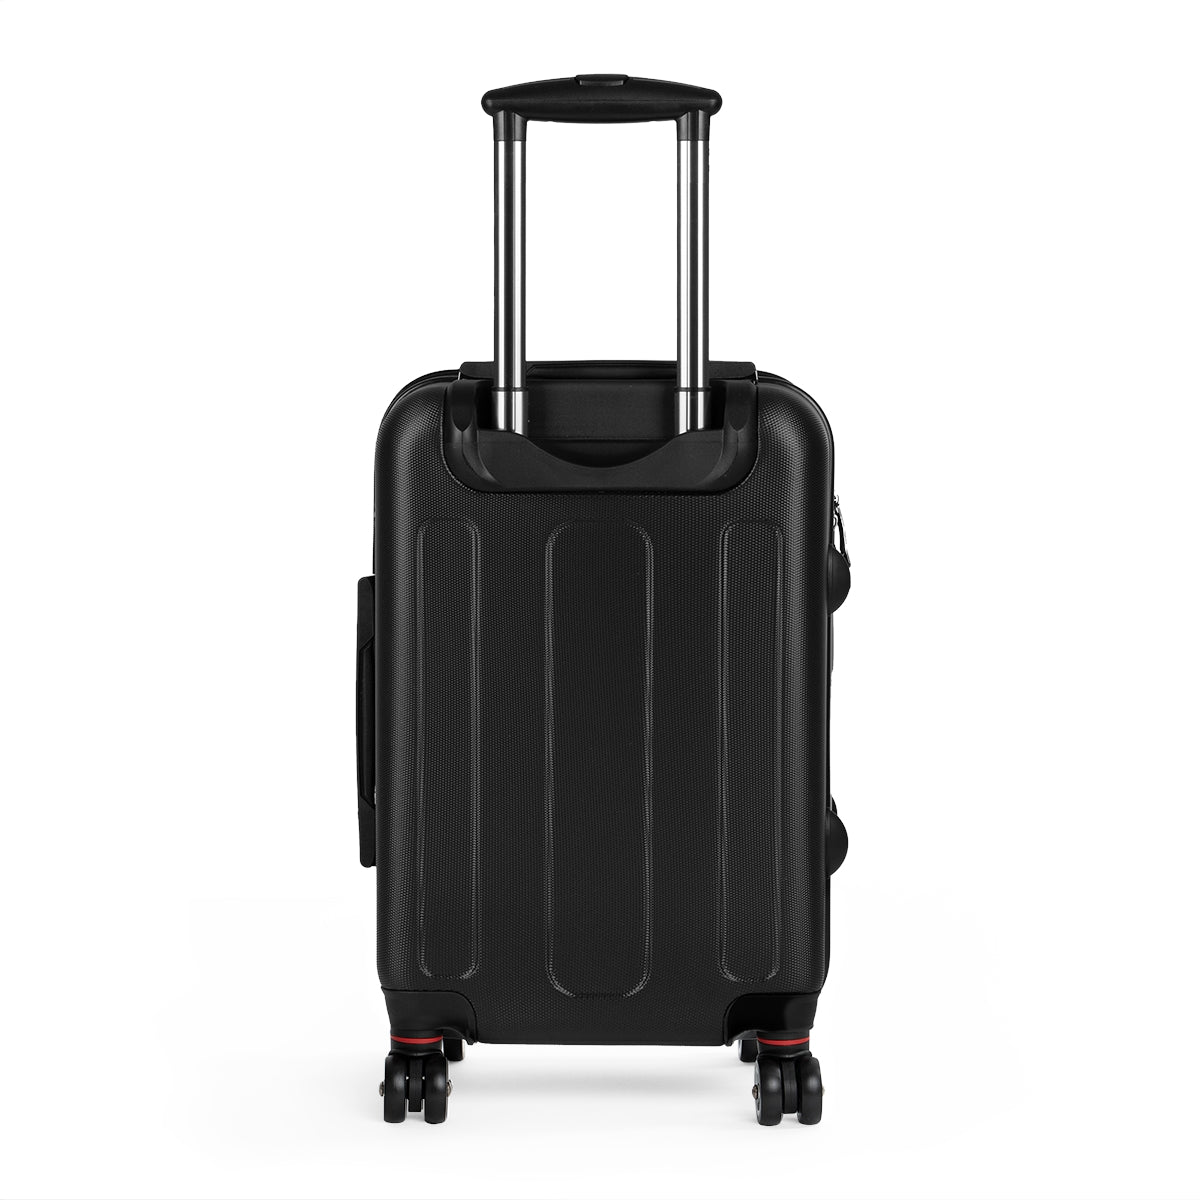 Getrott The Night Watch by Rembrandt Black Cabin Suitcase Extended Storage Adjustable Telescopic Handle Double wheeled Polycarbonate Hard-shell Built-in Lock-Bags-Geotrott